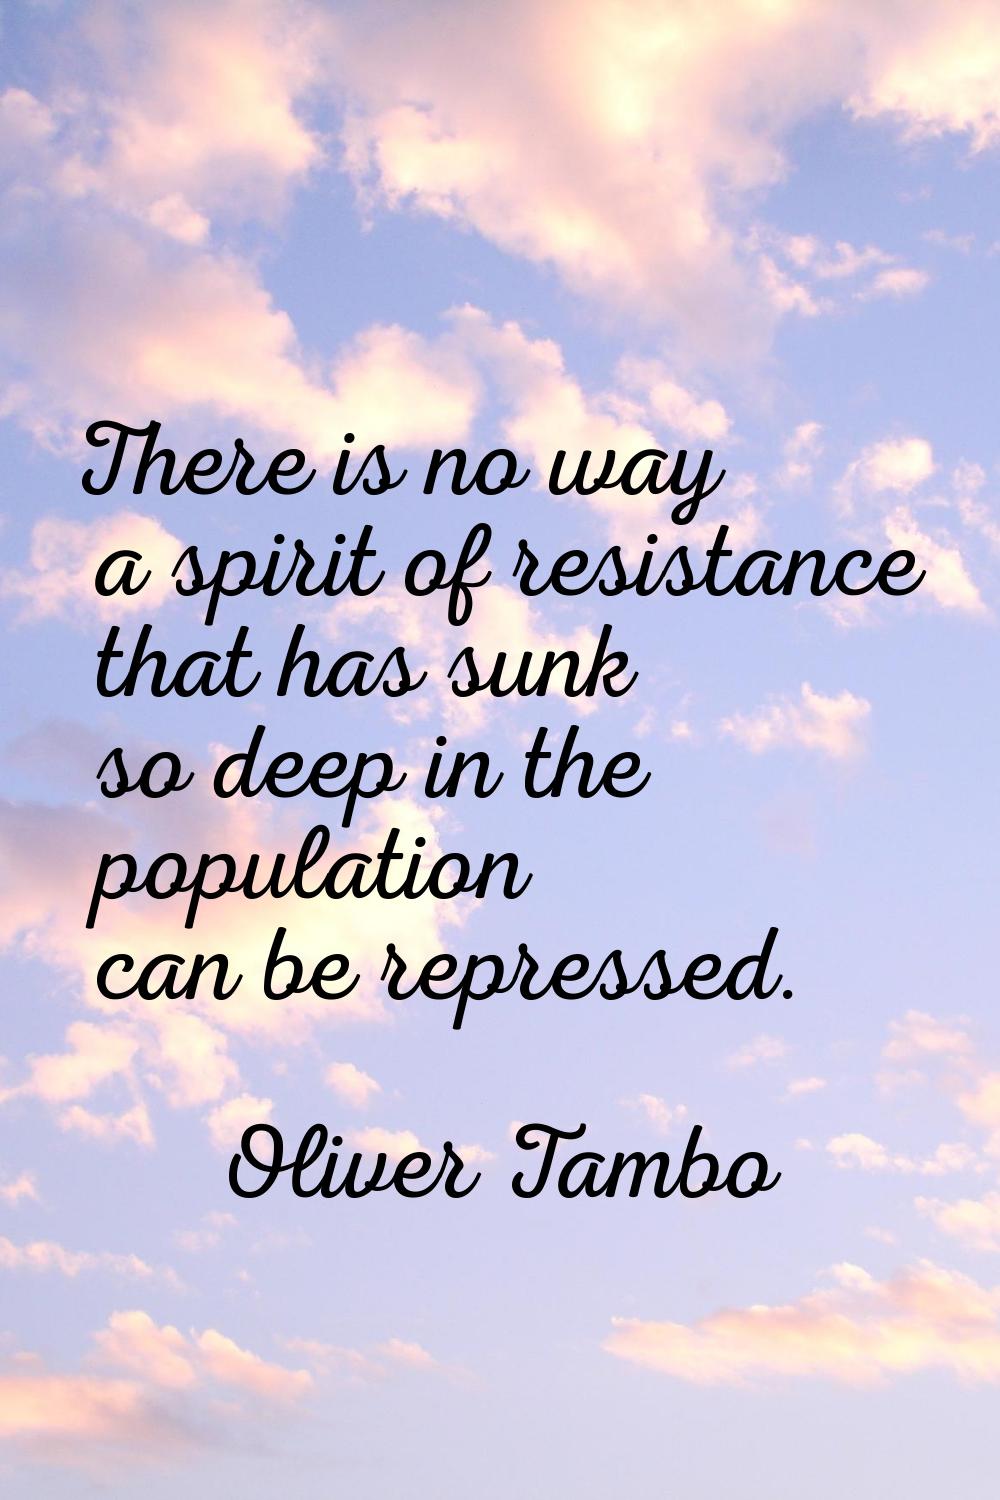 There is no way a spirit of resistance that has sunk so deep in the population can be repressed.